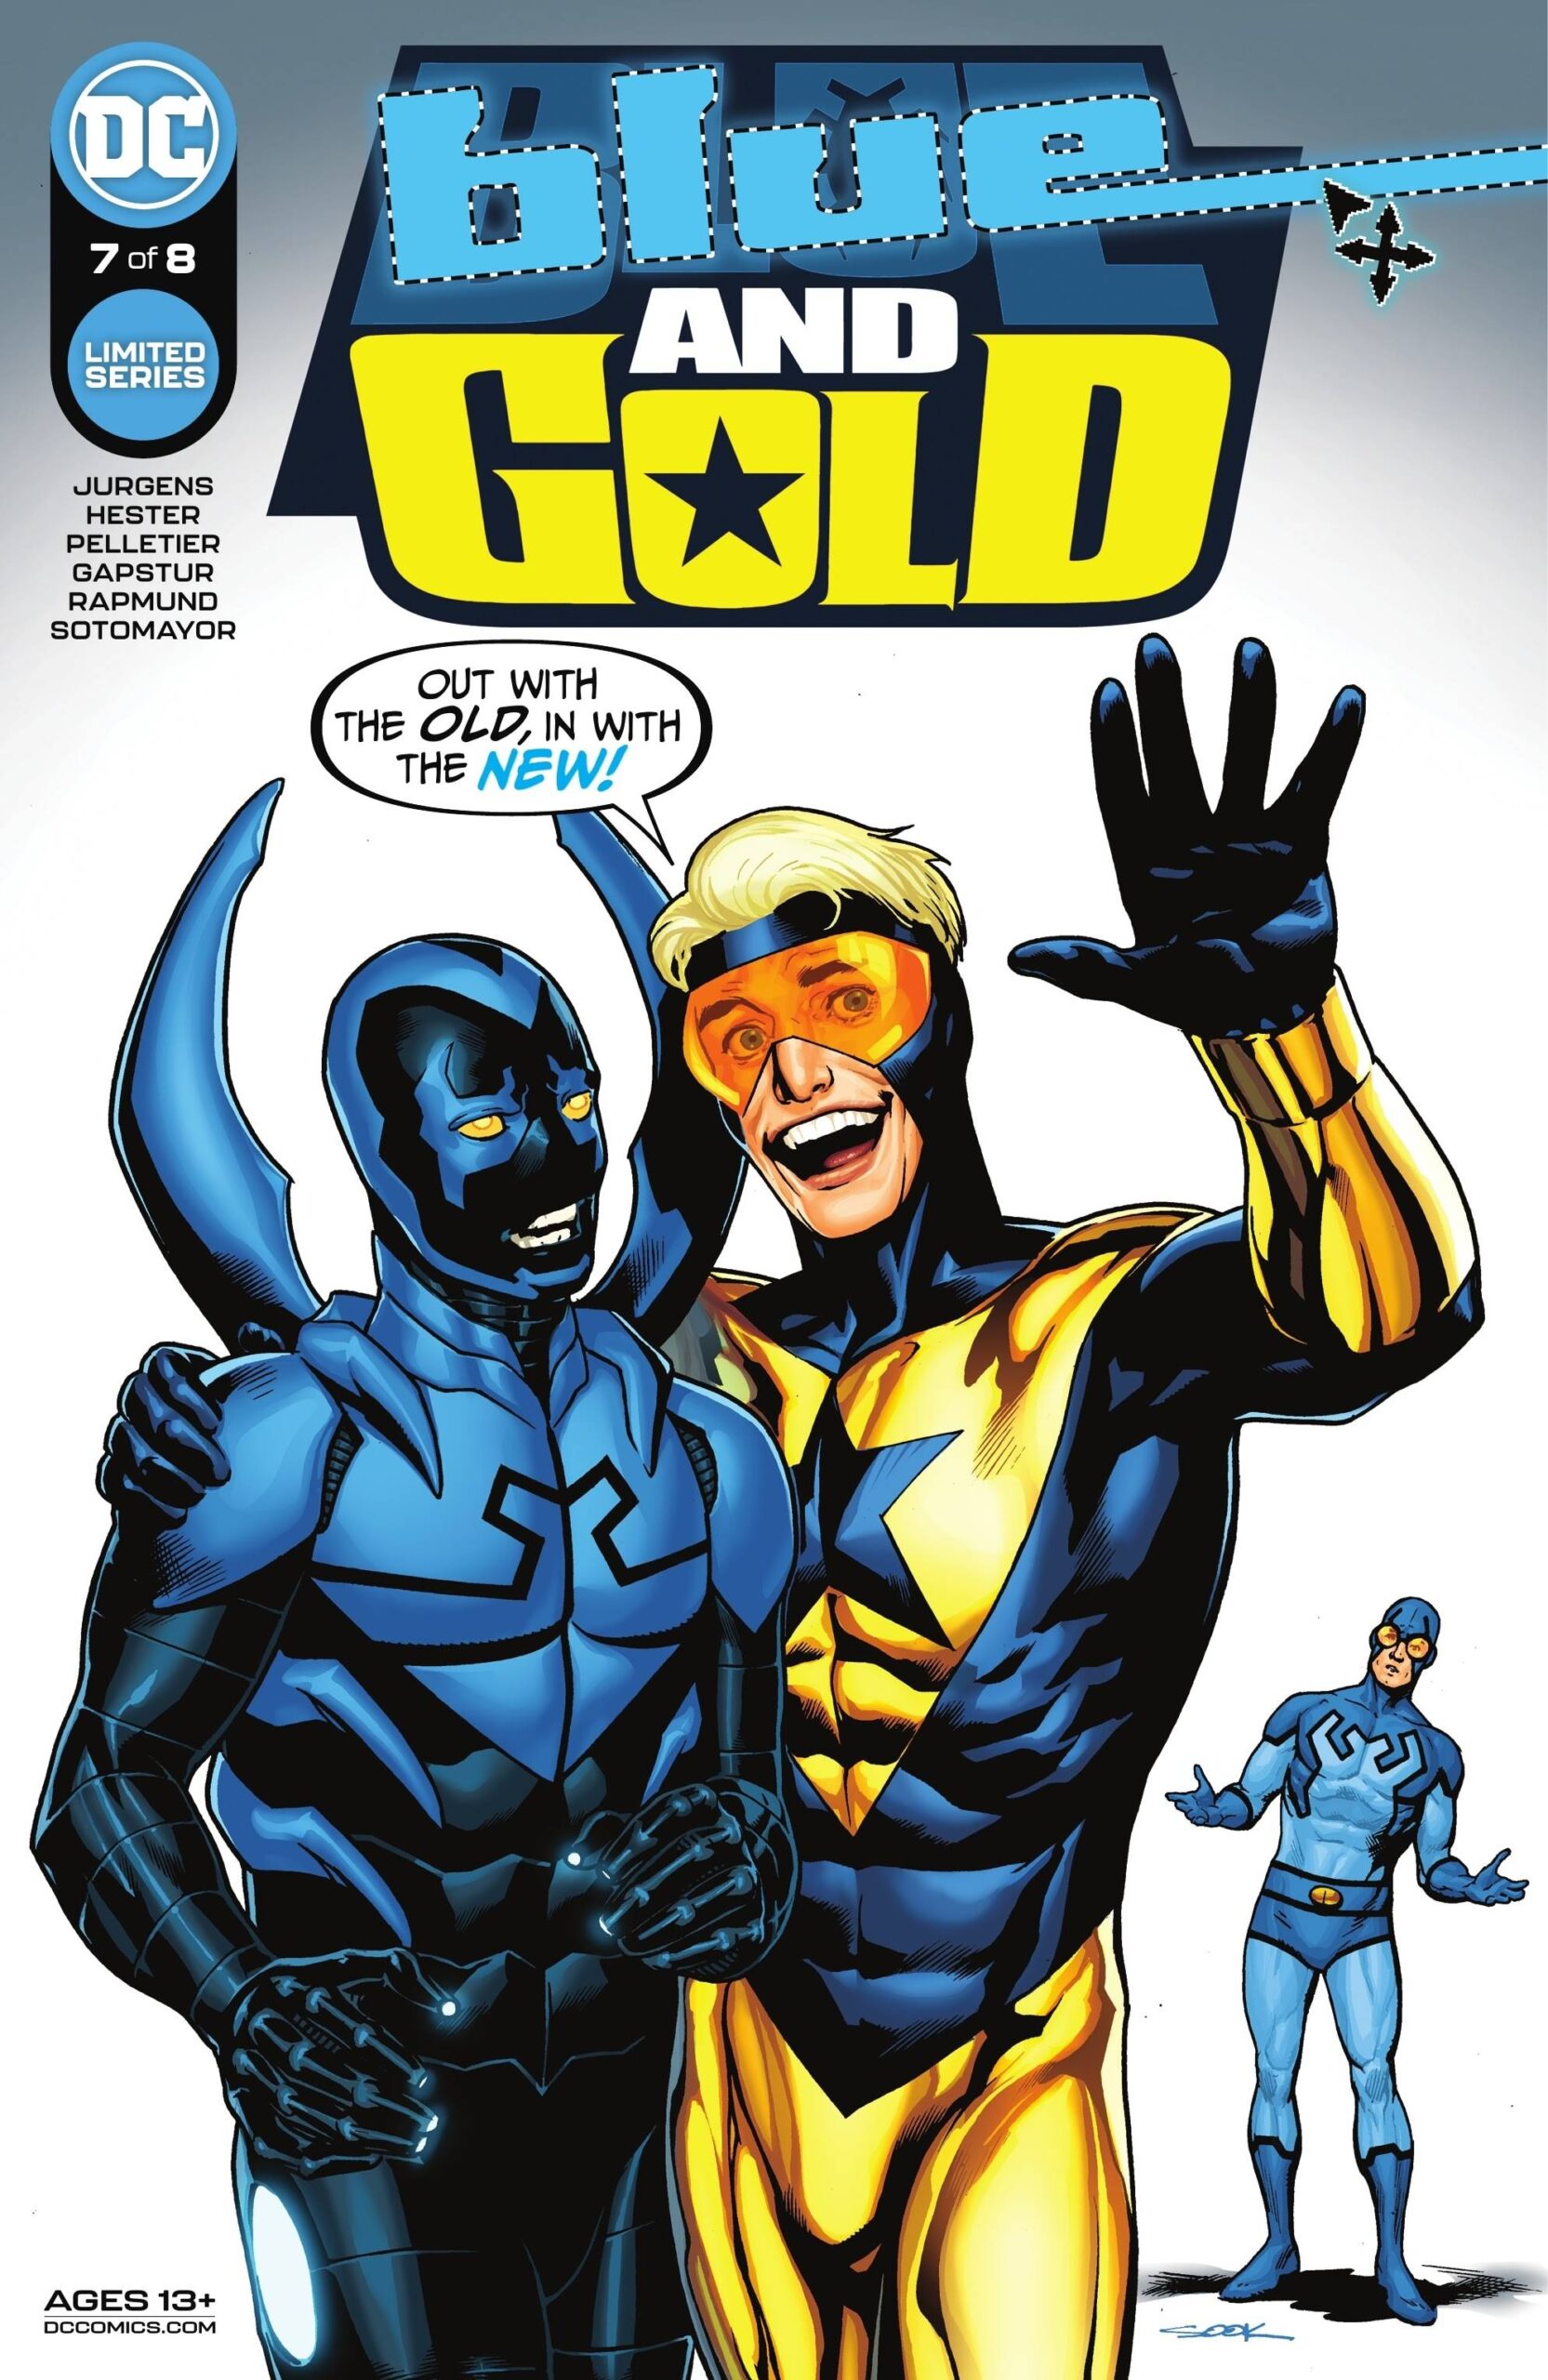 Blue Beetle review: the kind of throwback DC should have been